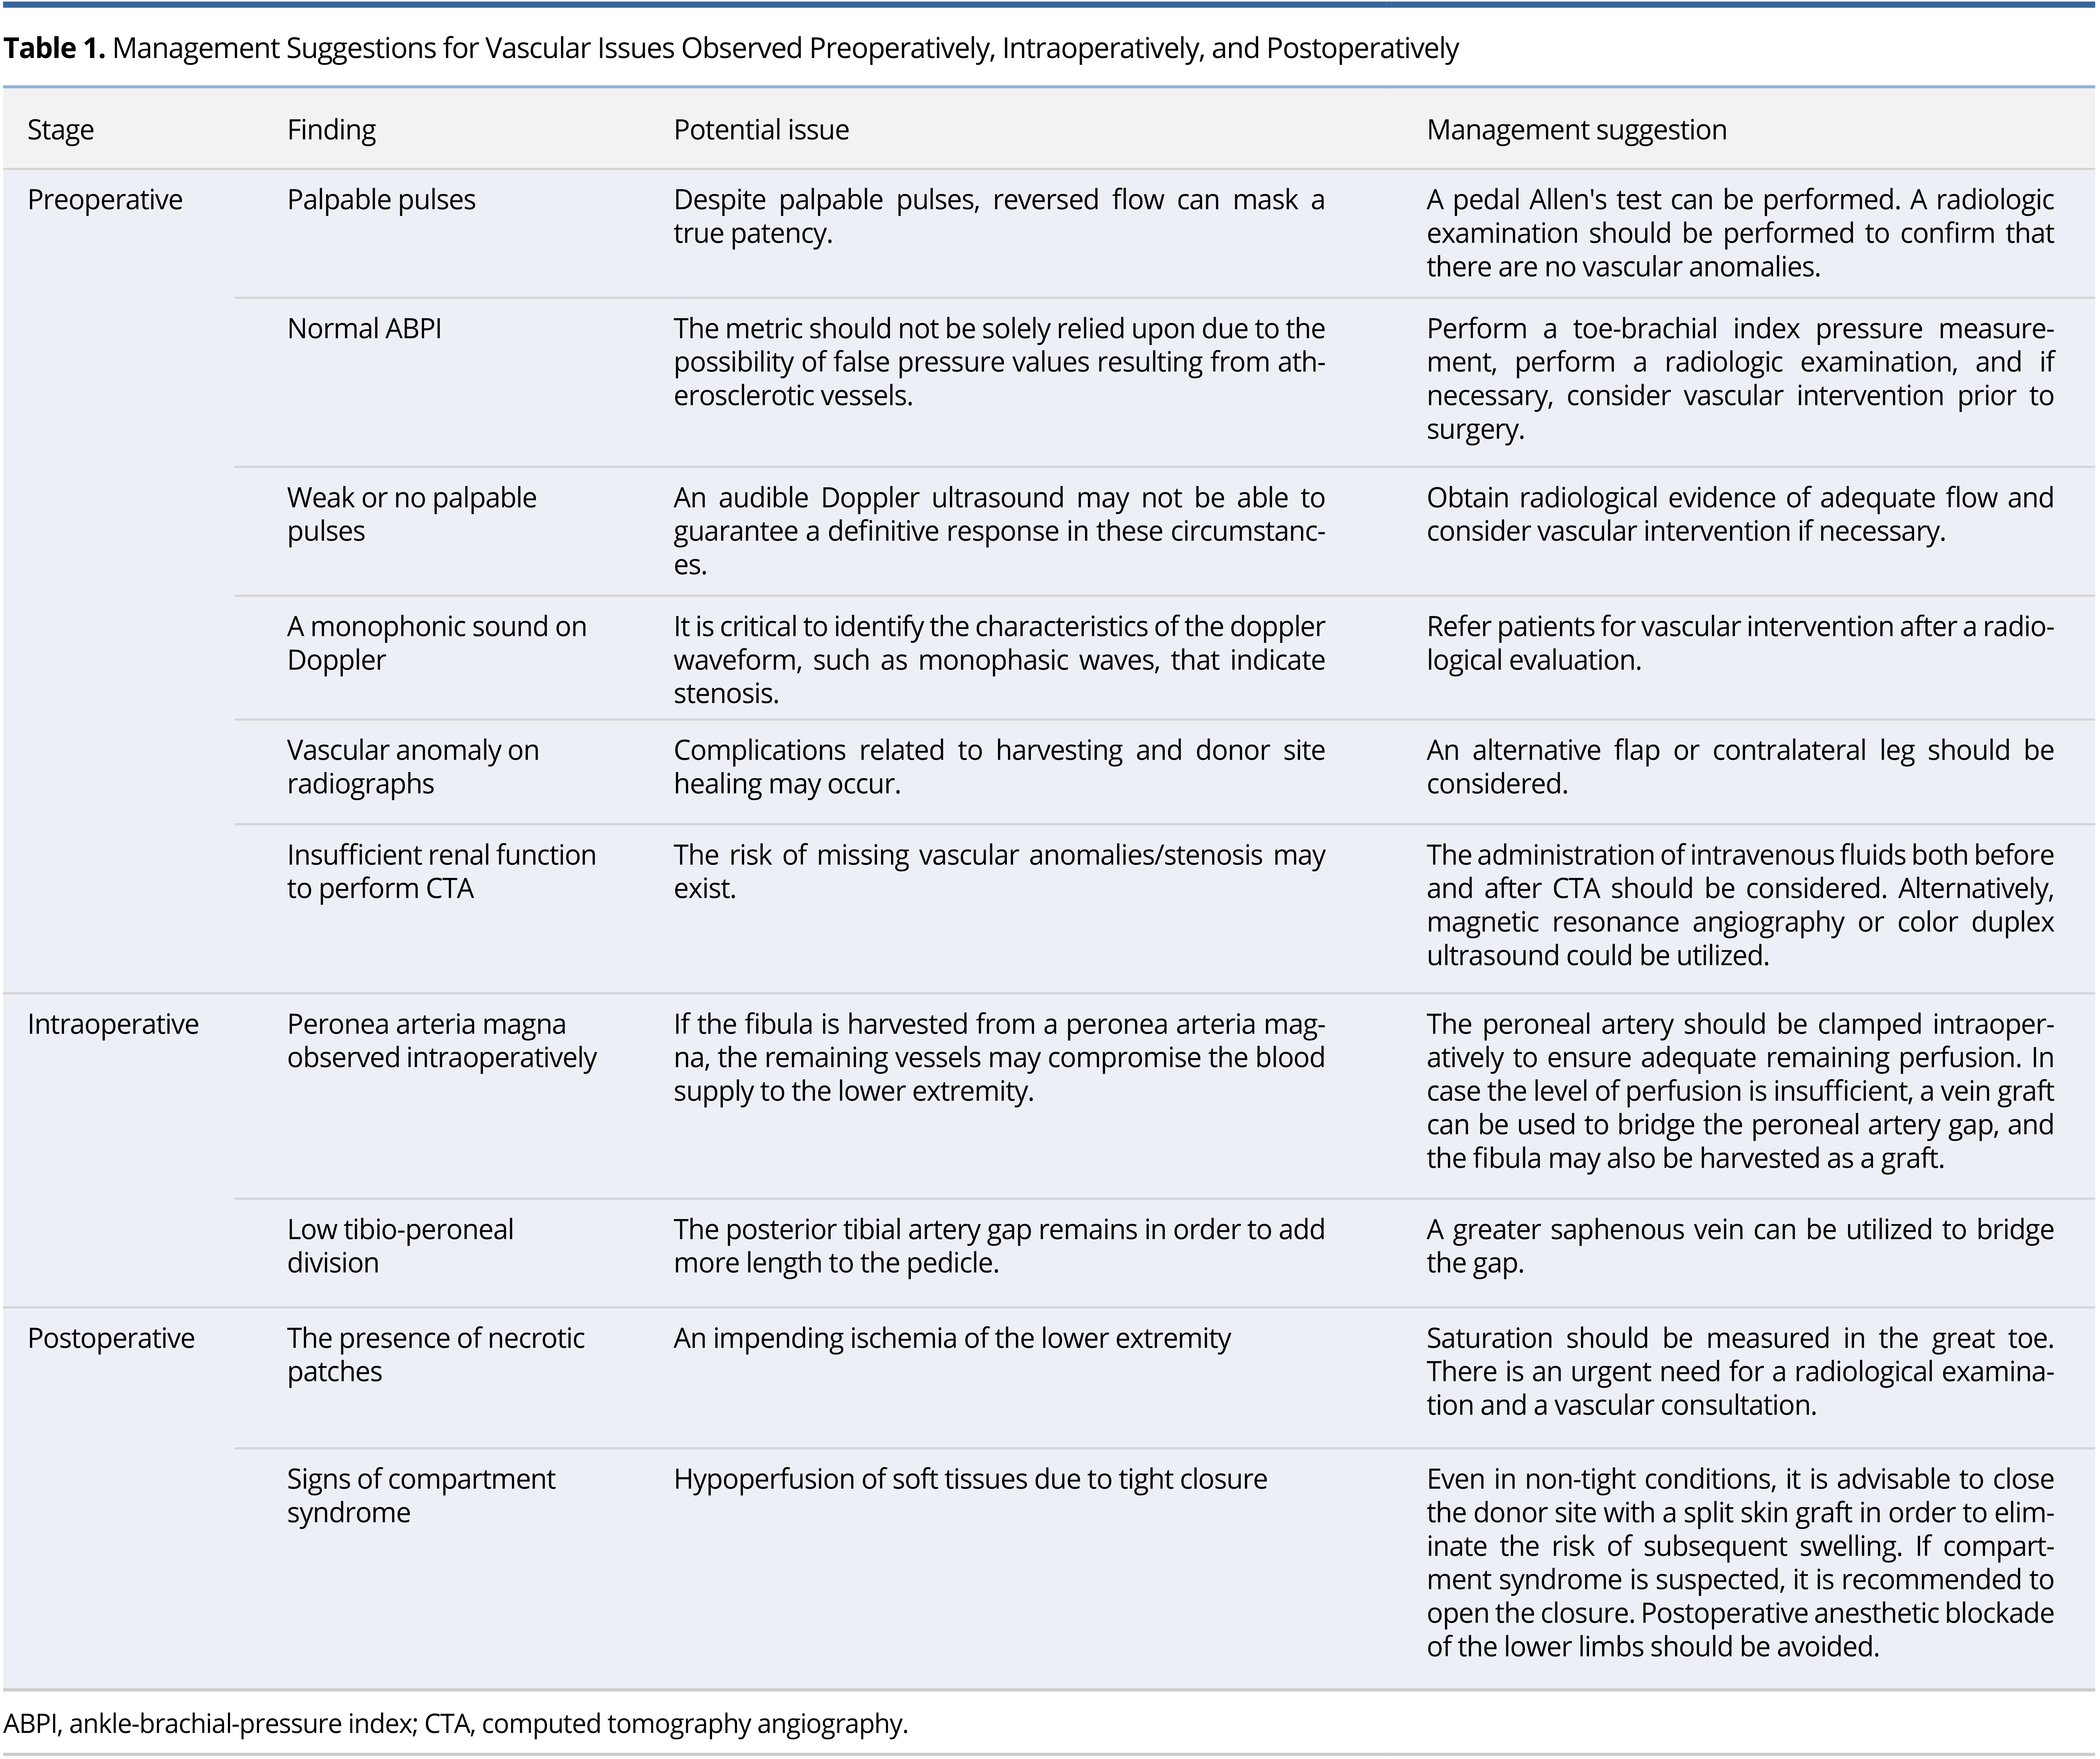 Table 1.jpgManagement Suggestions for Vascular Issues Observed Preoperatively, Intraoperatively, and Postoperatively